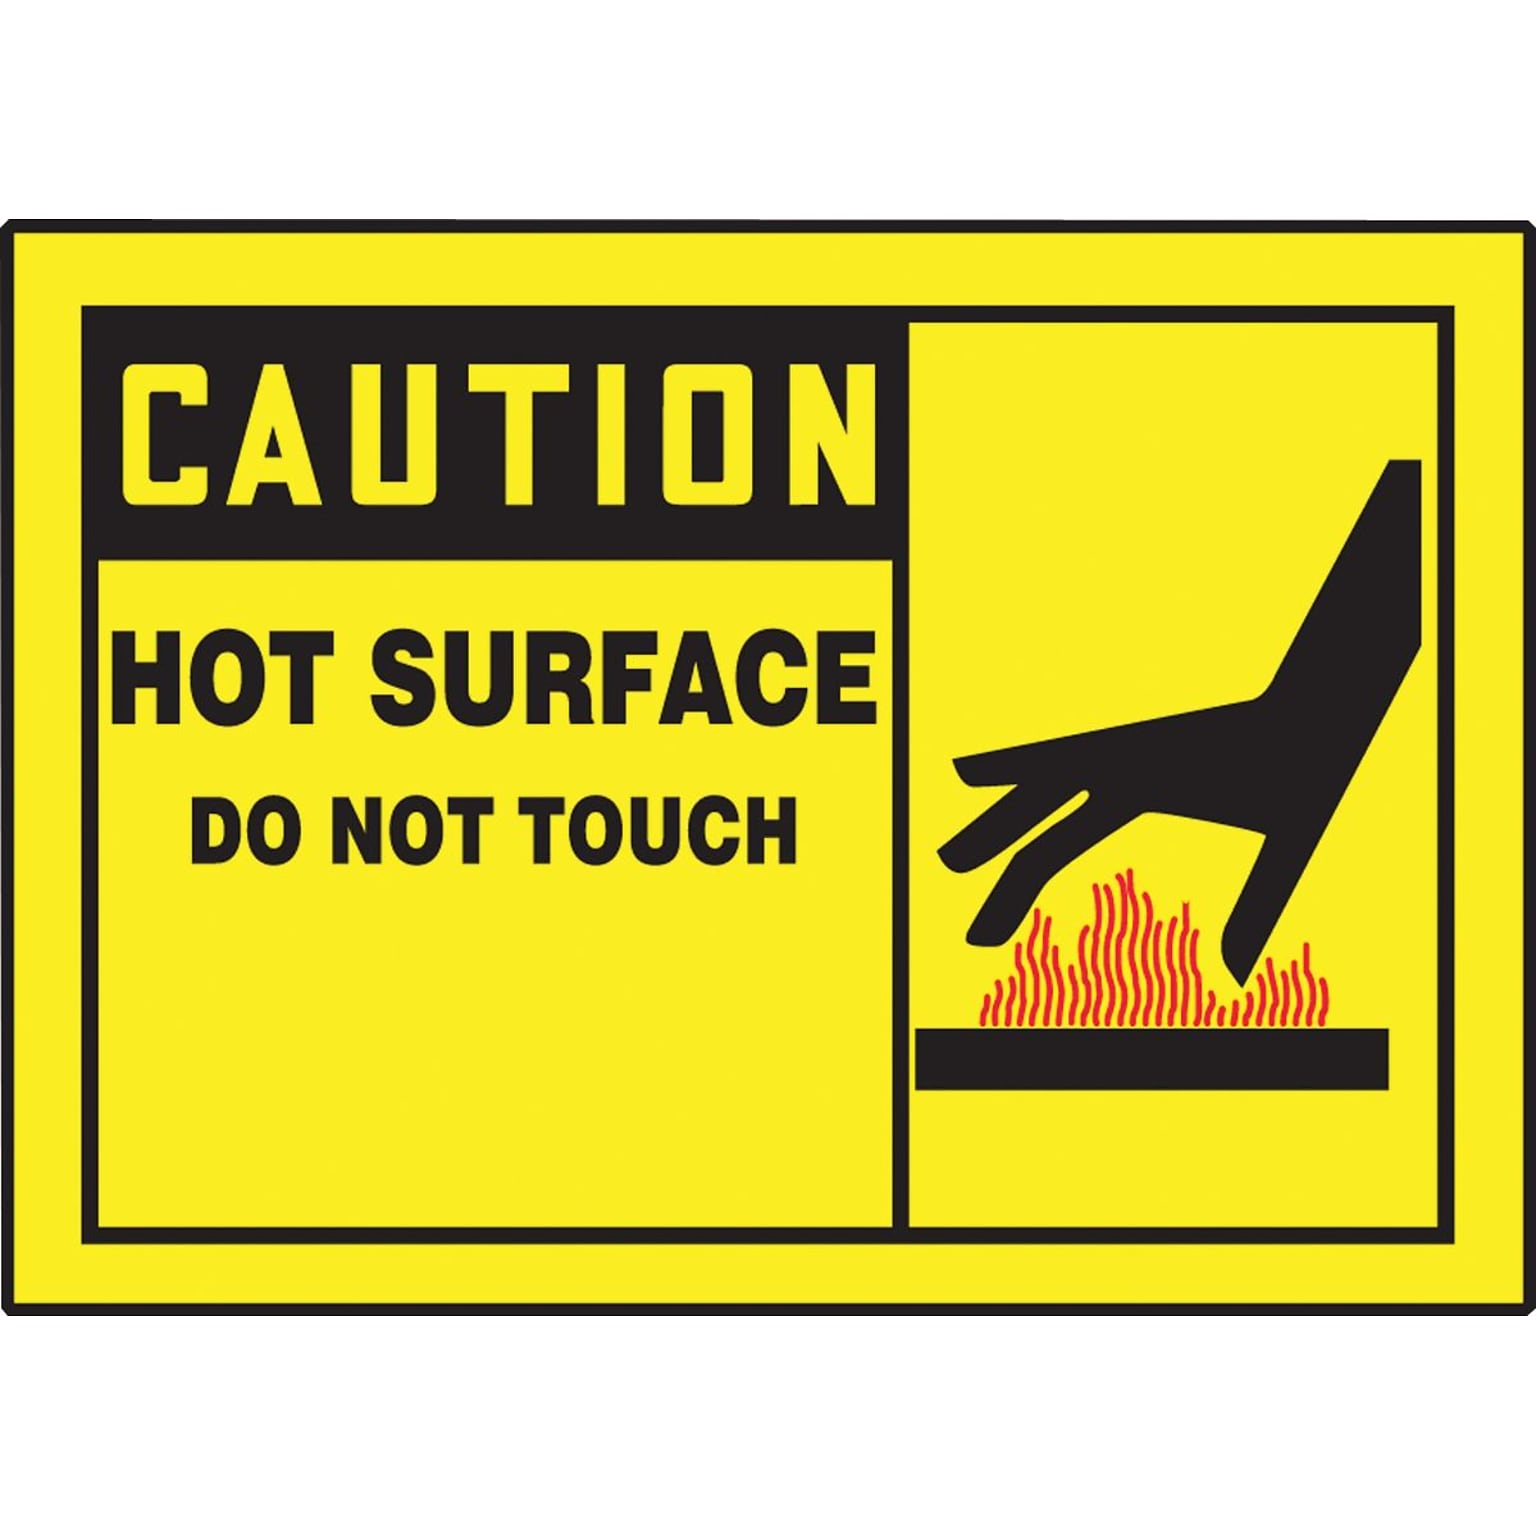 Accuform Safety Label, CAUTION HOT SURFACE DO NOT TOUCH, 3 1/2 x 5, Adhesive Vinyl, 5/Pack (LEQM647VSP)